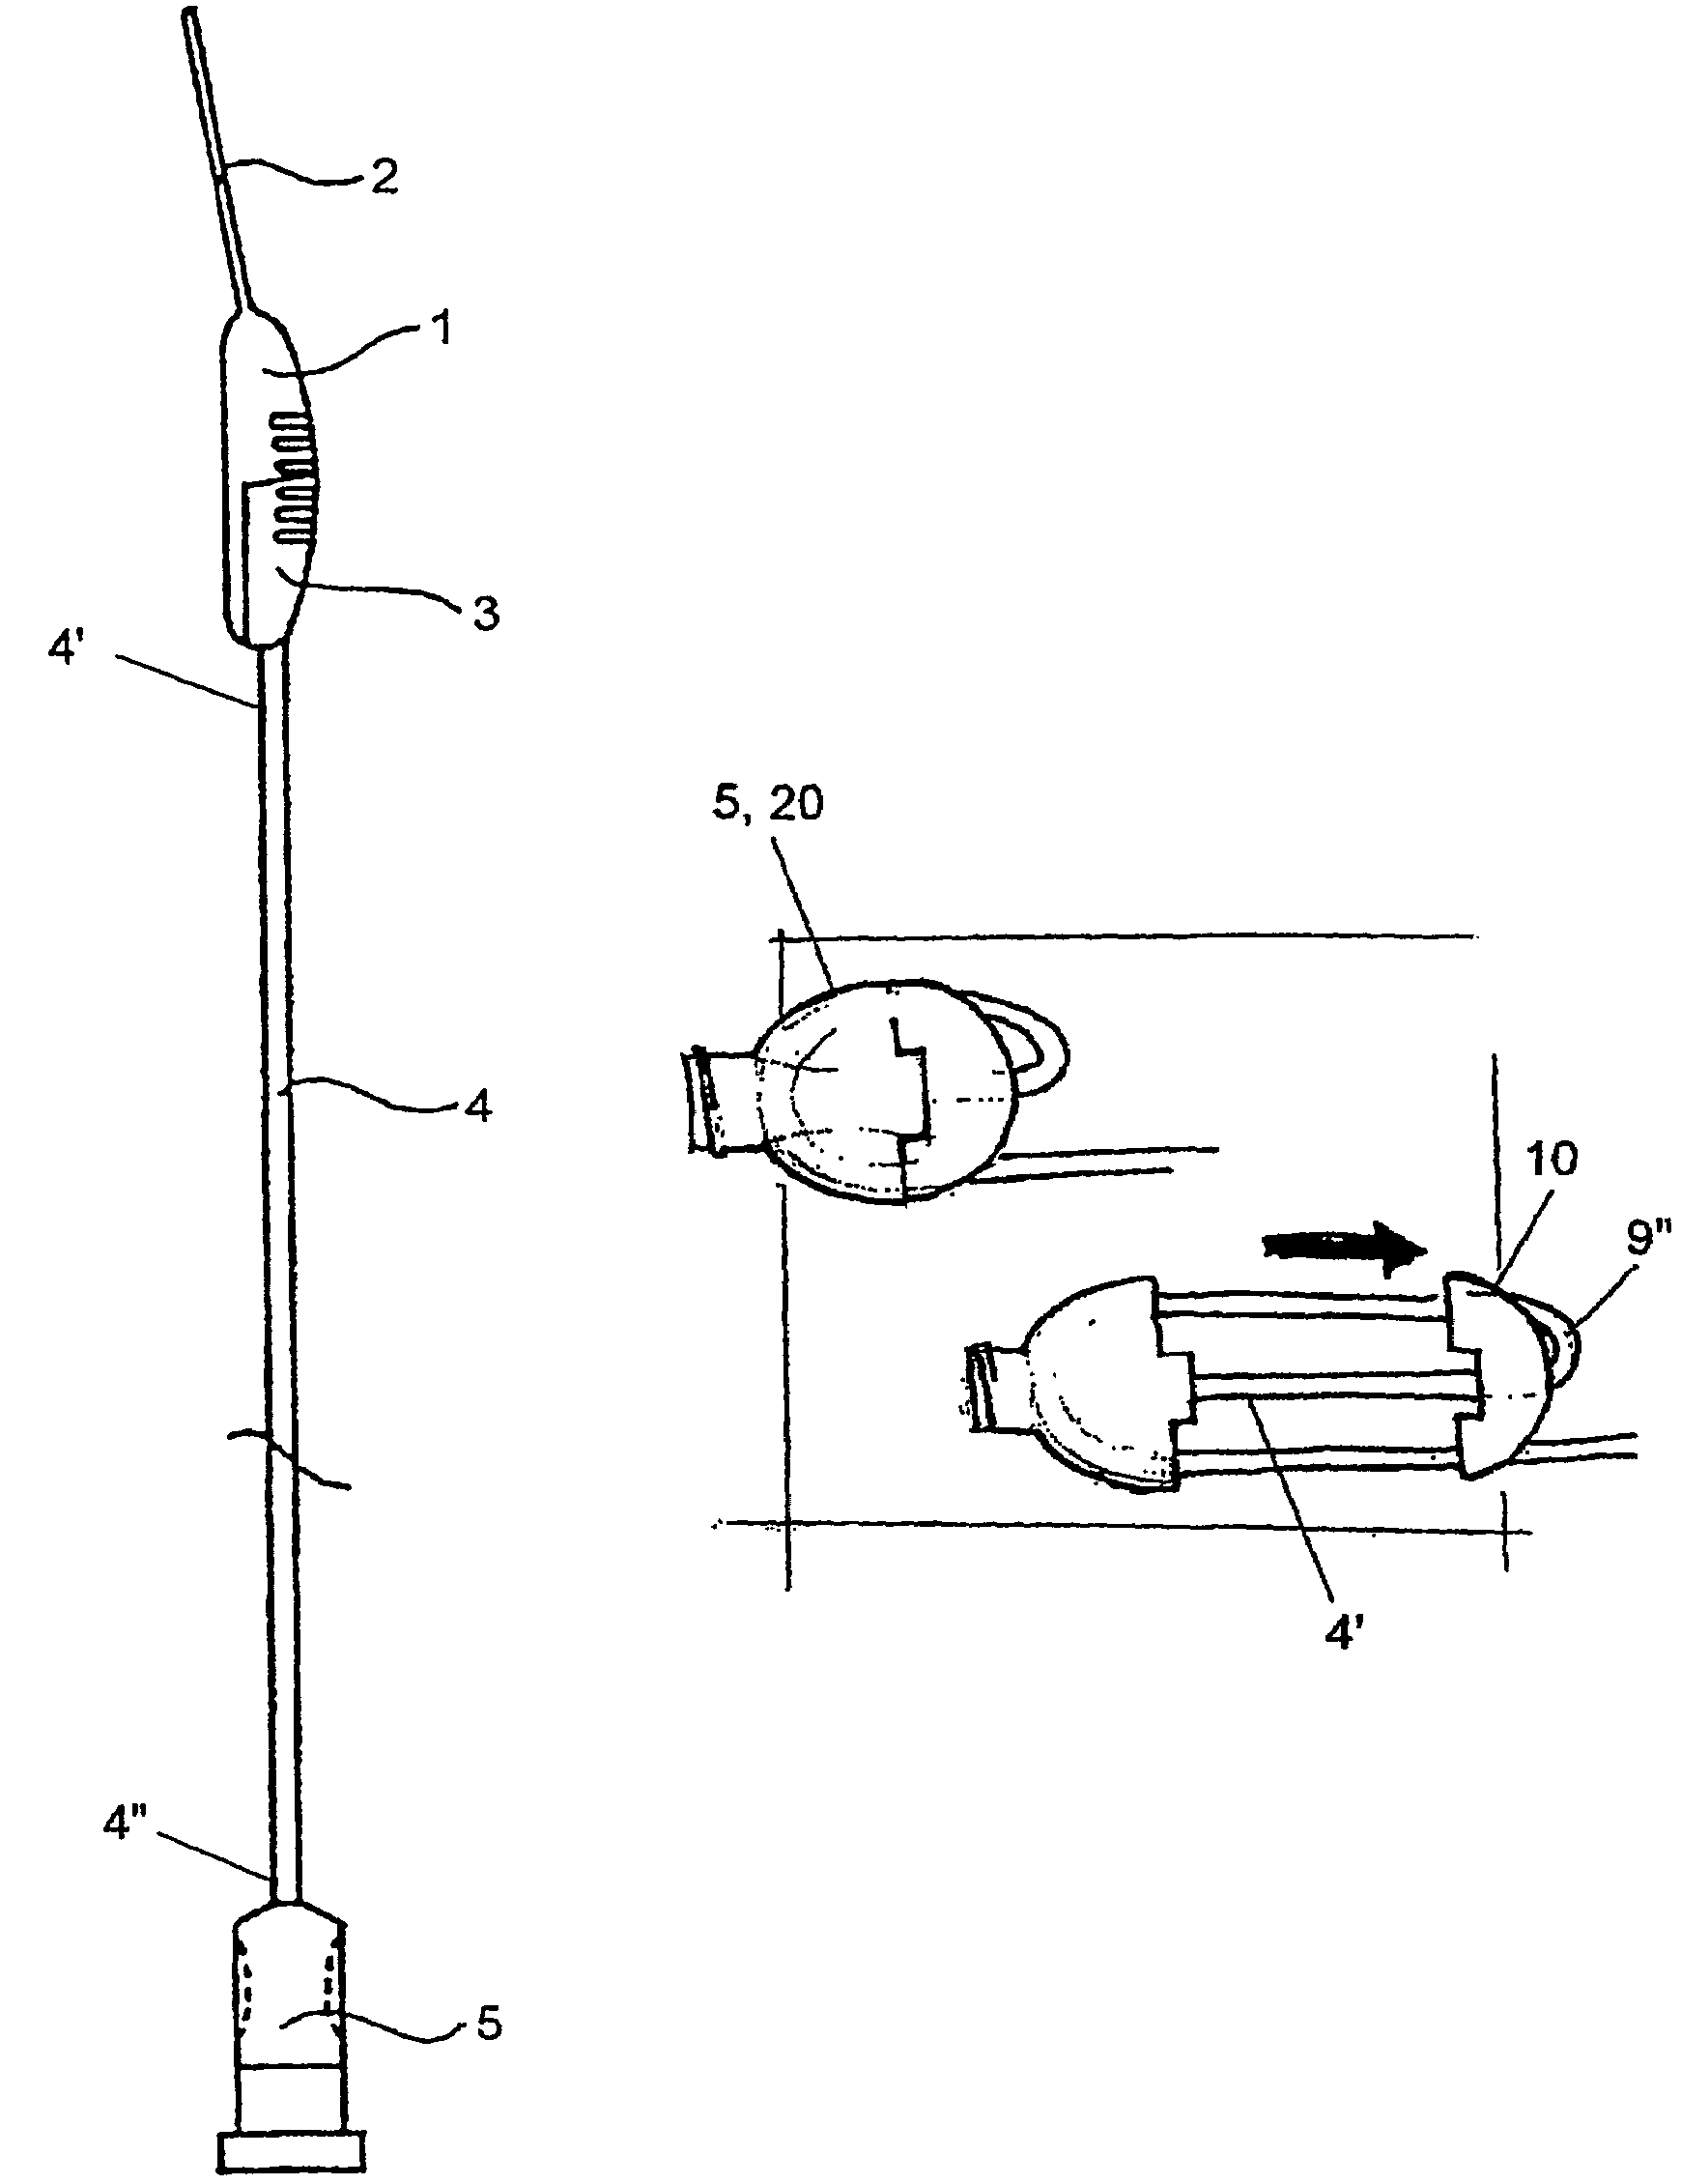 Device for subcutaneous administration of a medicament to a patient